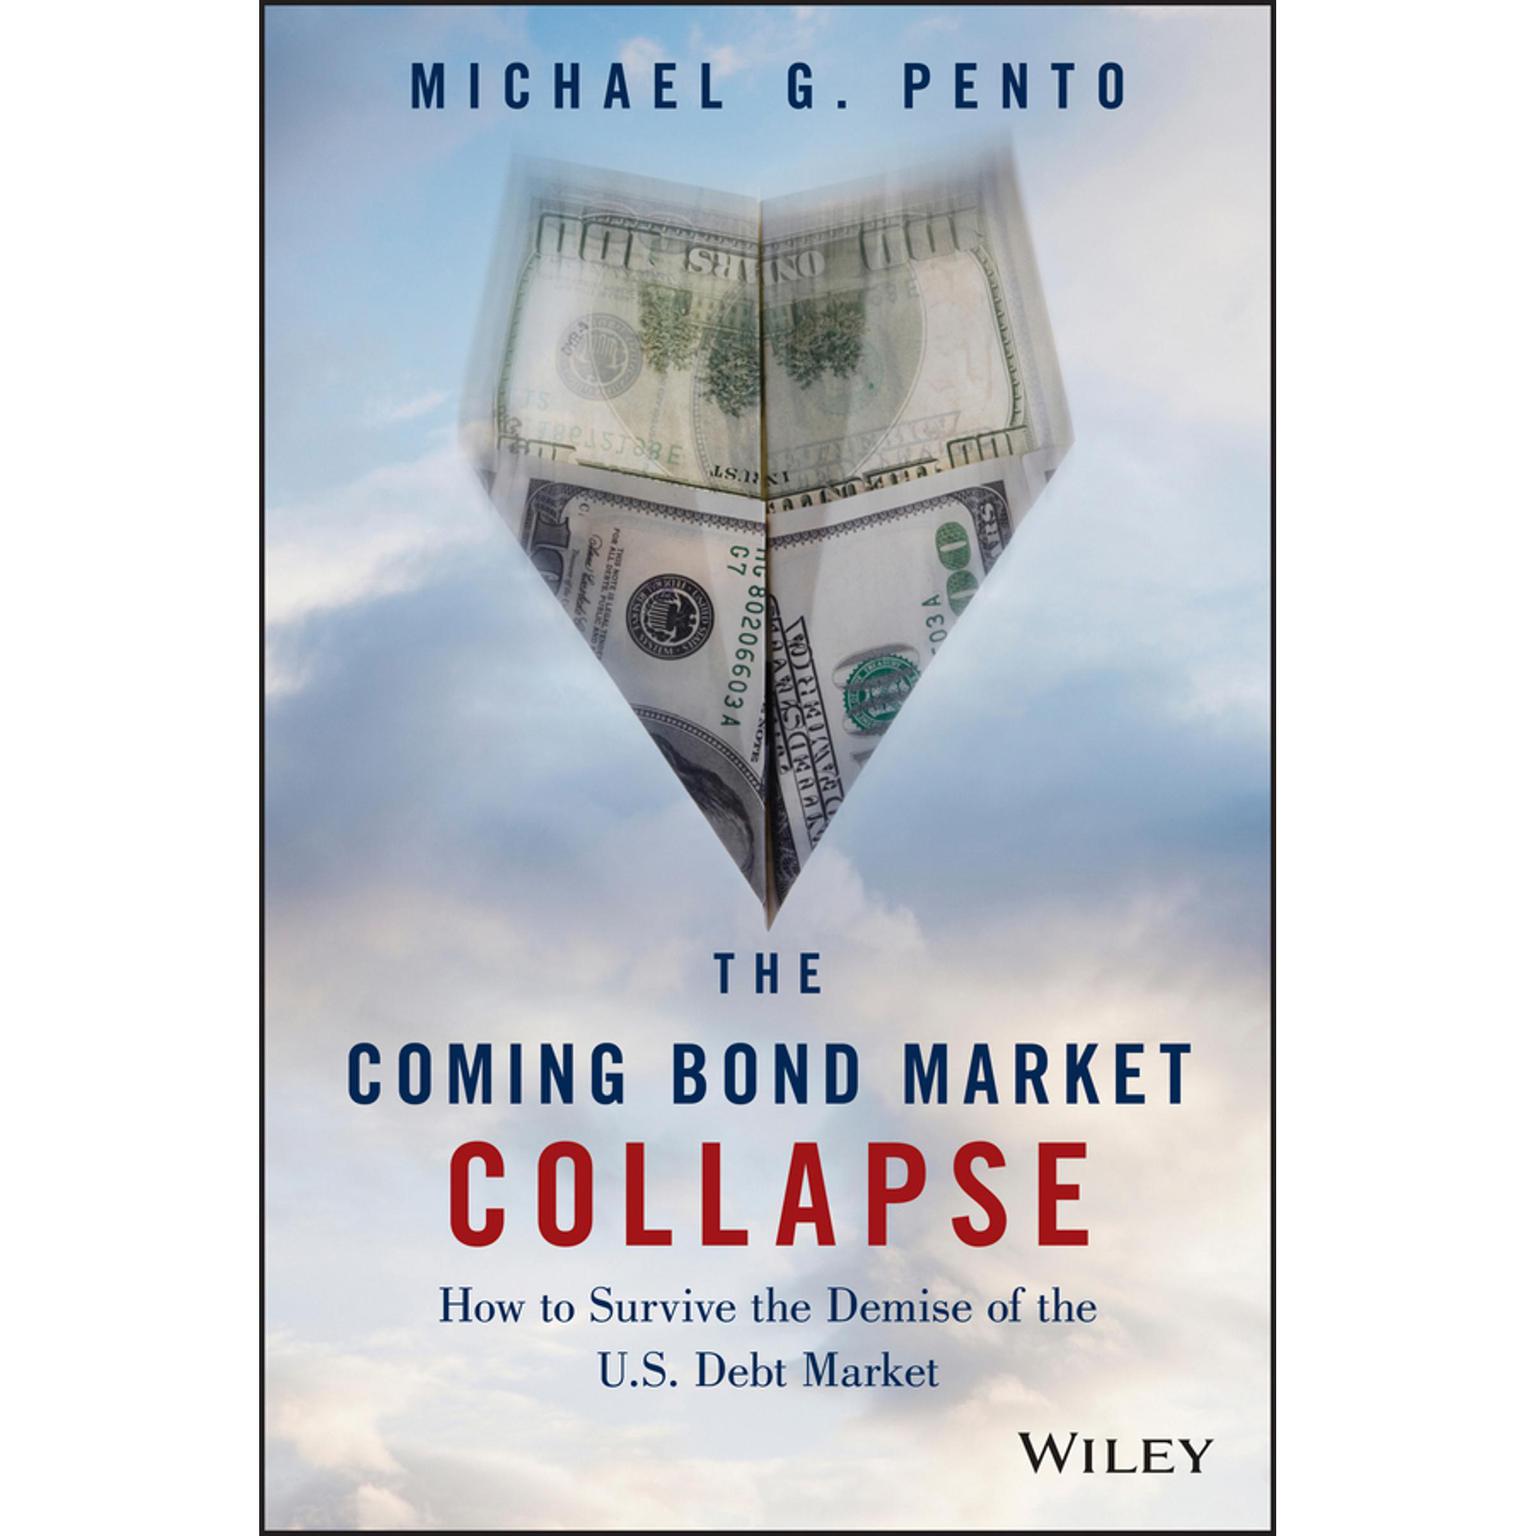 The Coming Bond Market Collapse: How to Survive the Demise of the U.S. Debt Market Audiobook, by Michael G. Pento